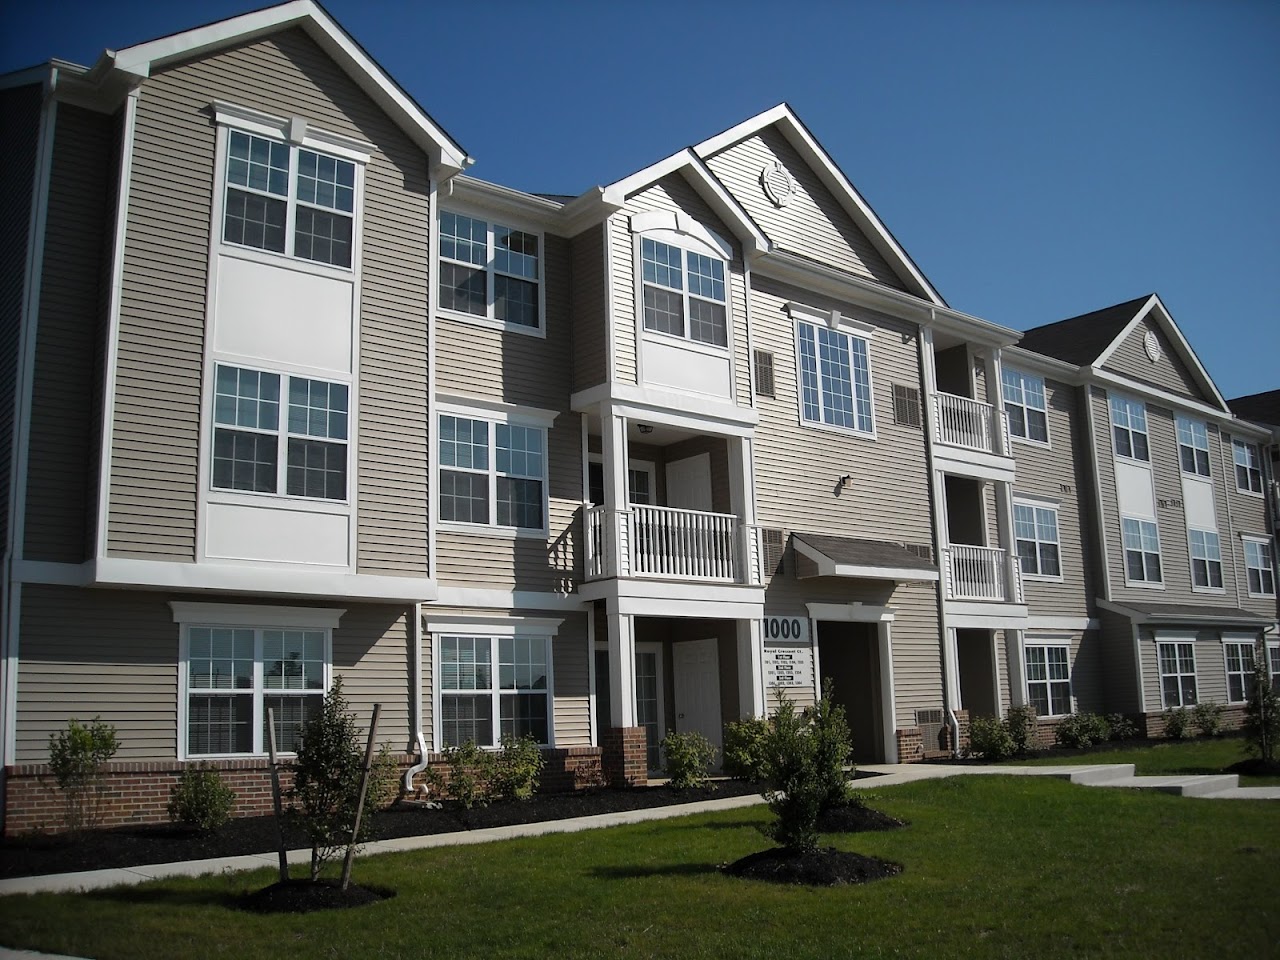 Photo of LITC#06414 ROYAL CRESCENT. Affordable housing located at 1100 ROYAL CRESCENT CT MOUNT ROYAL, NJ 08061